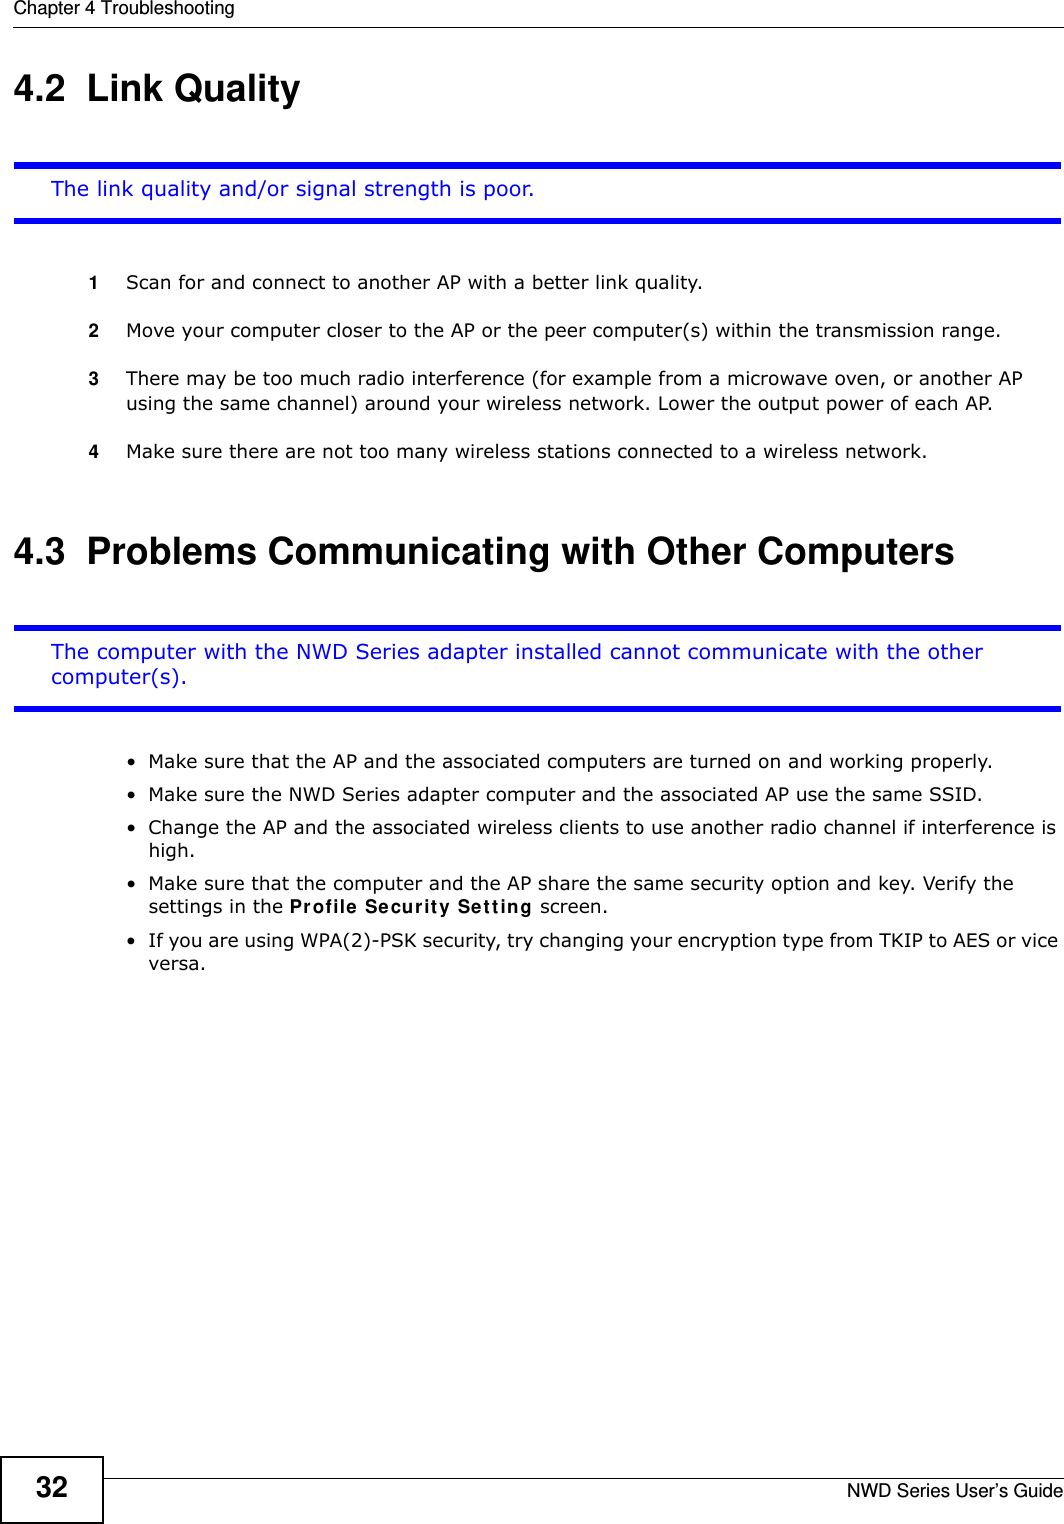 Chapter 4 TroubleshootingNWD Series User’s Guide324.2  Link QualityThe link quality and/or signal strength is poor.1Scan for and connect to another AP with a better link quality.2Move your computer closer to the AP or the peer computer(s) within the transmission range.3There may be too much radio interference (for example from a microwave oven, or another AP using the same channel) around your wireless network. Lower the output power of each AP.4Make sure there are not too many wireless stations connected to a wireless network.4.3  Problems Communicating with Other ComputersThe computer with the NWD Series adapter installed cannot communicate with the other computer(s).• Make sure that the AP and the associated computers are turned on and working properly.  • Make sure the NWD Series adapter computer and the associated AP use the same SSID.• Change the AP and the associated wireless clients to use another radio channel if interference is high.• Make sure that the computer and the AP share the same security option and key. Verify the settings in the Profile Security Setting screen.• If you are using WPA(2)-PSK security, try changing your encryption type from TKIP to AES or vice versa.